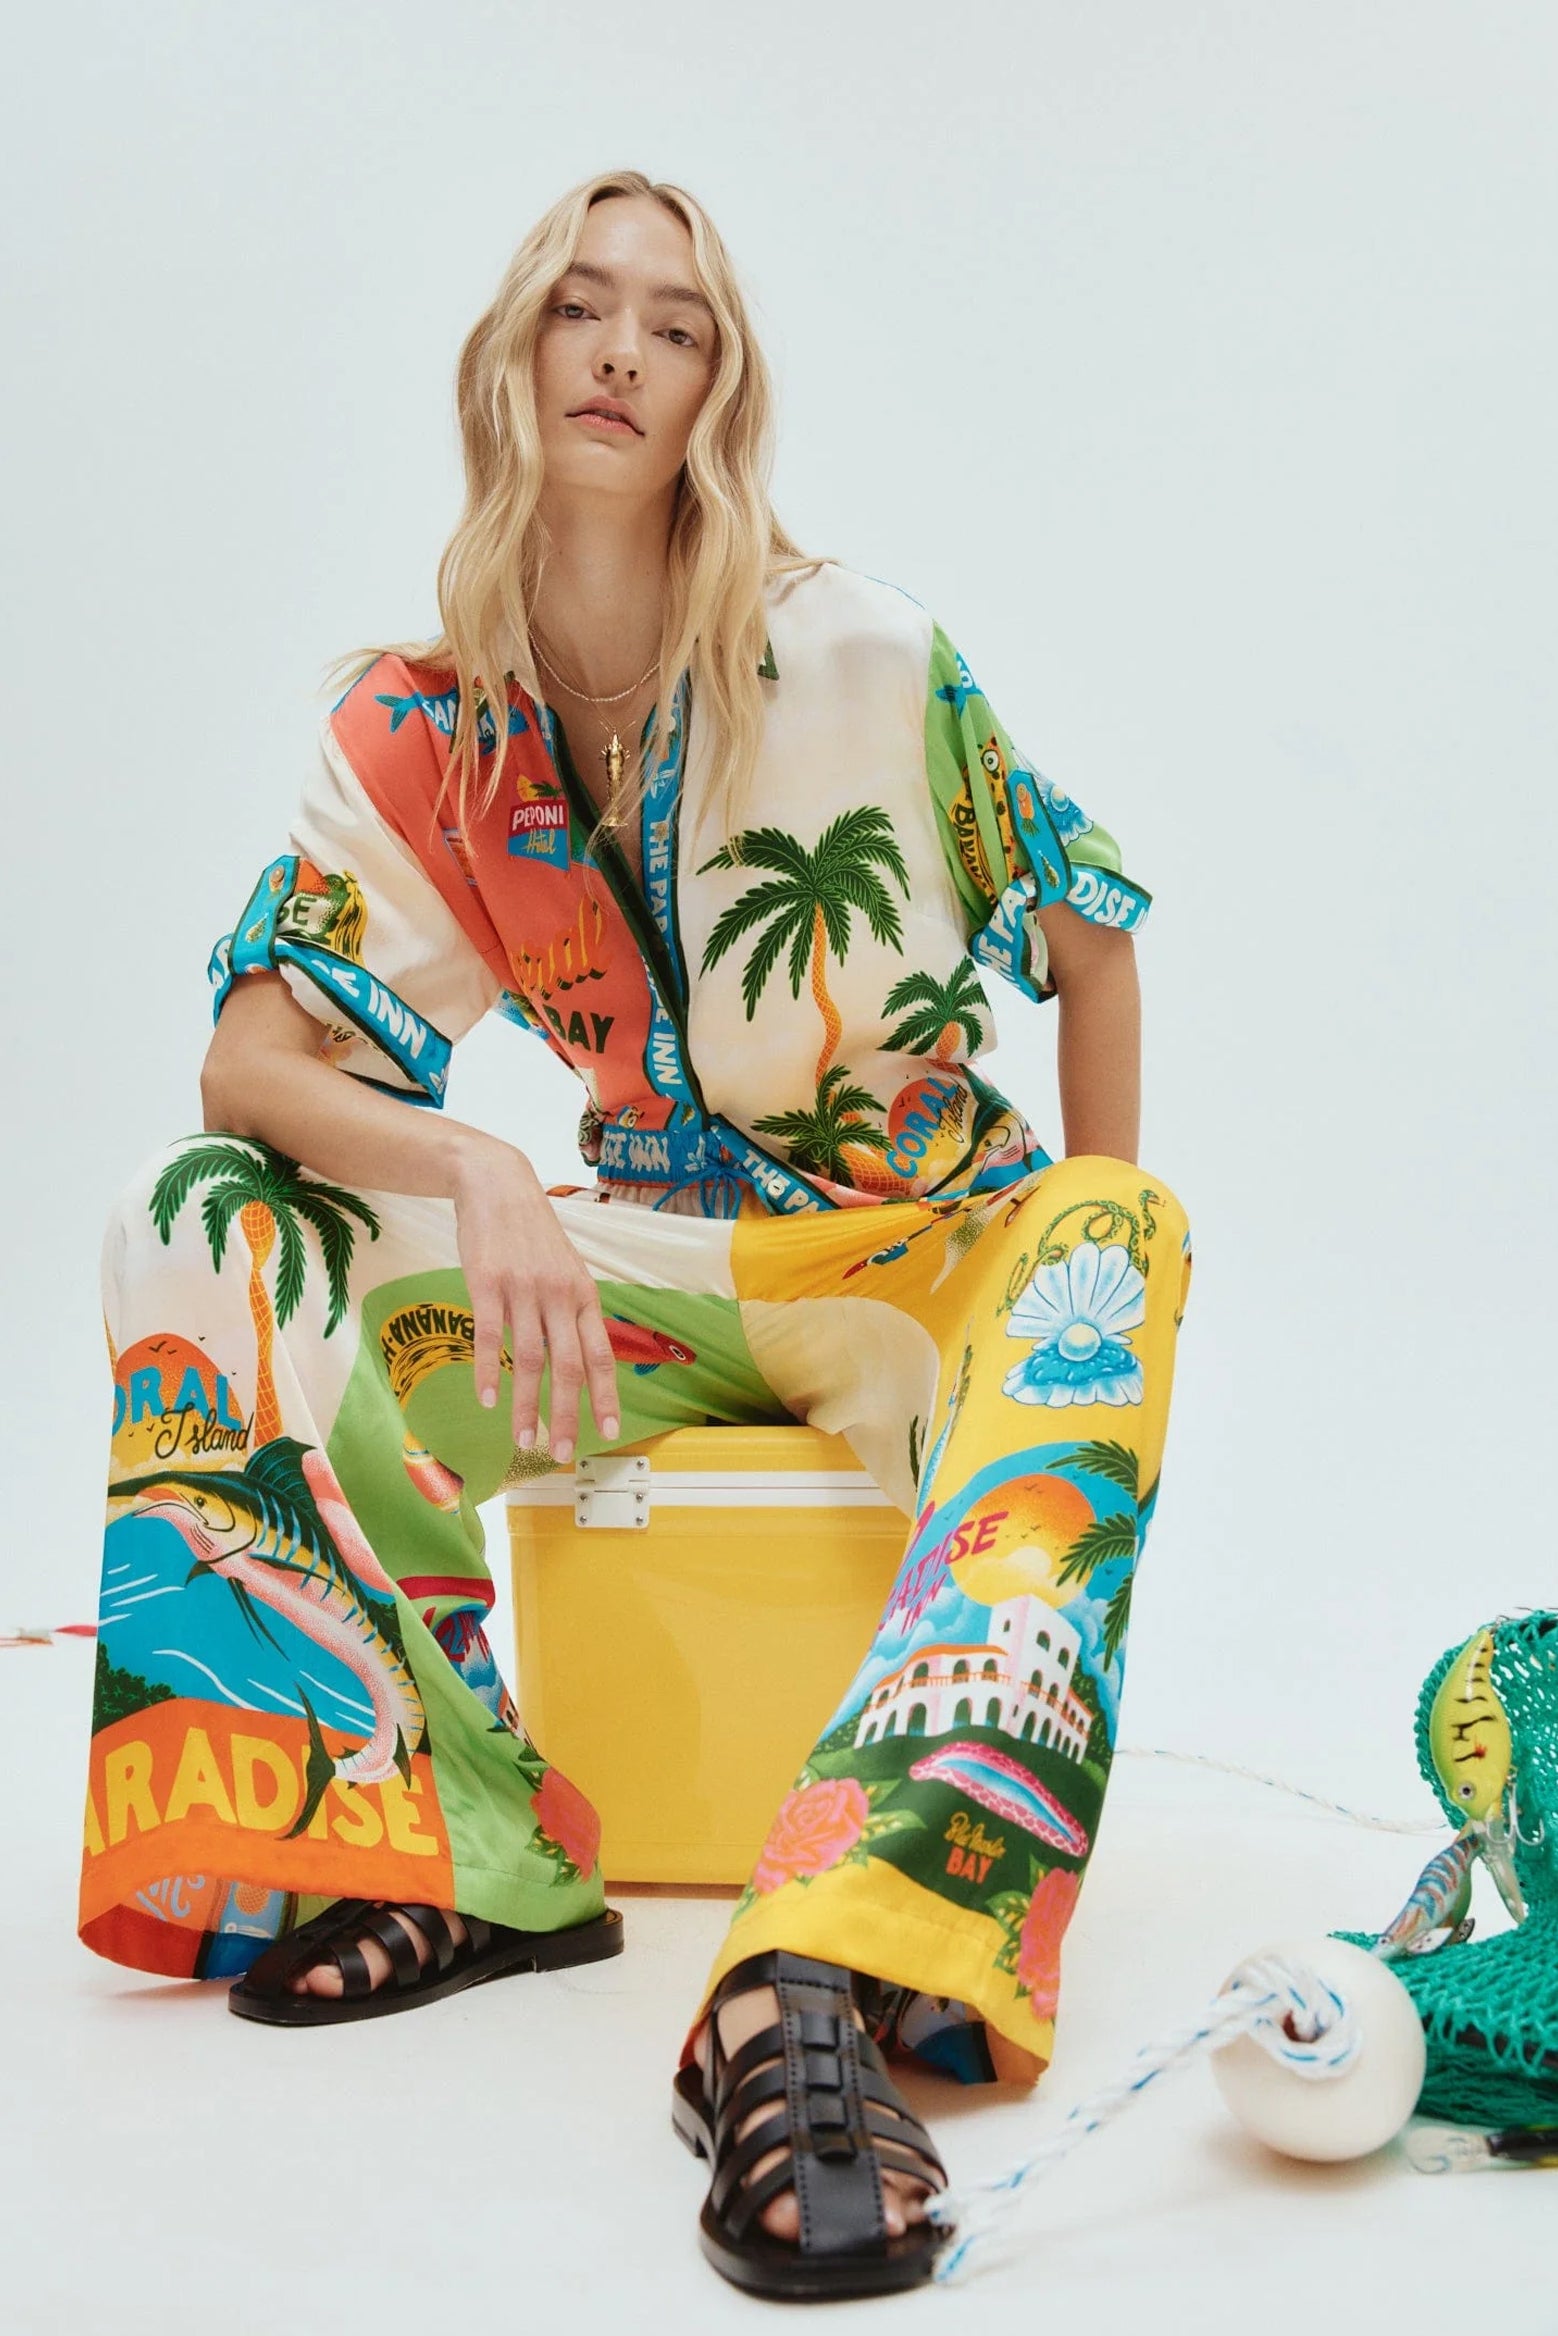 Alemais Paradiso Silk Shirt in Multi available at The New Trend Australia.